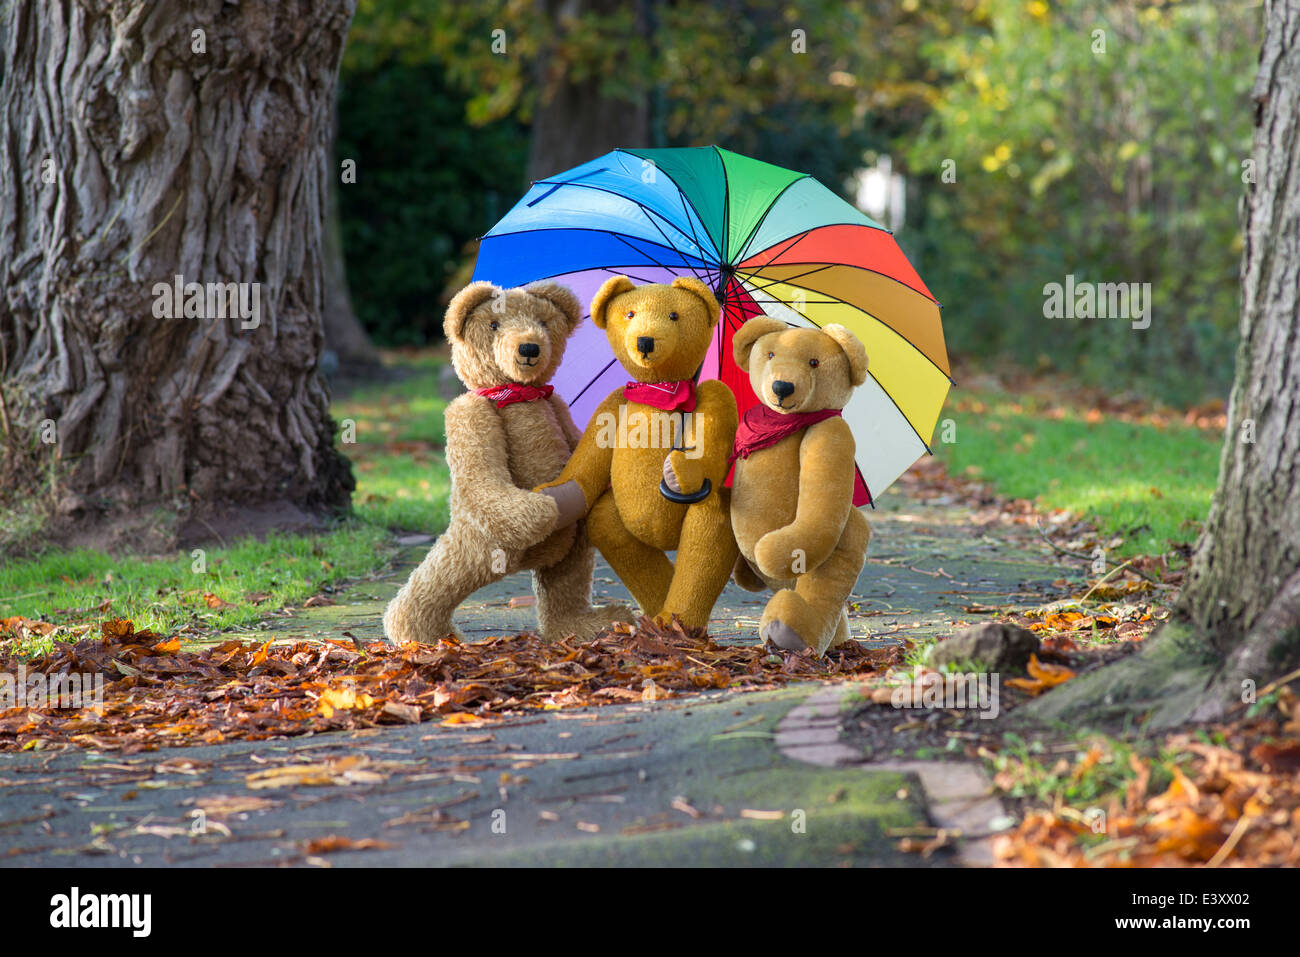 Three teddy bears in the park with umbrella. Fallen leaves, falling leaves. foot path, autumn, fall, Stock Photo